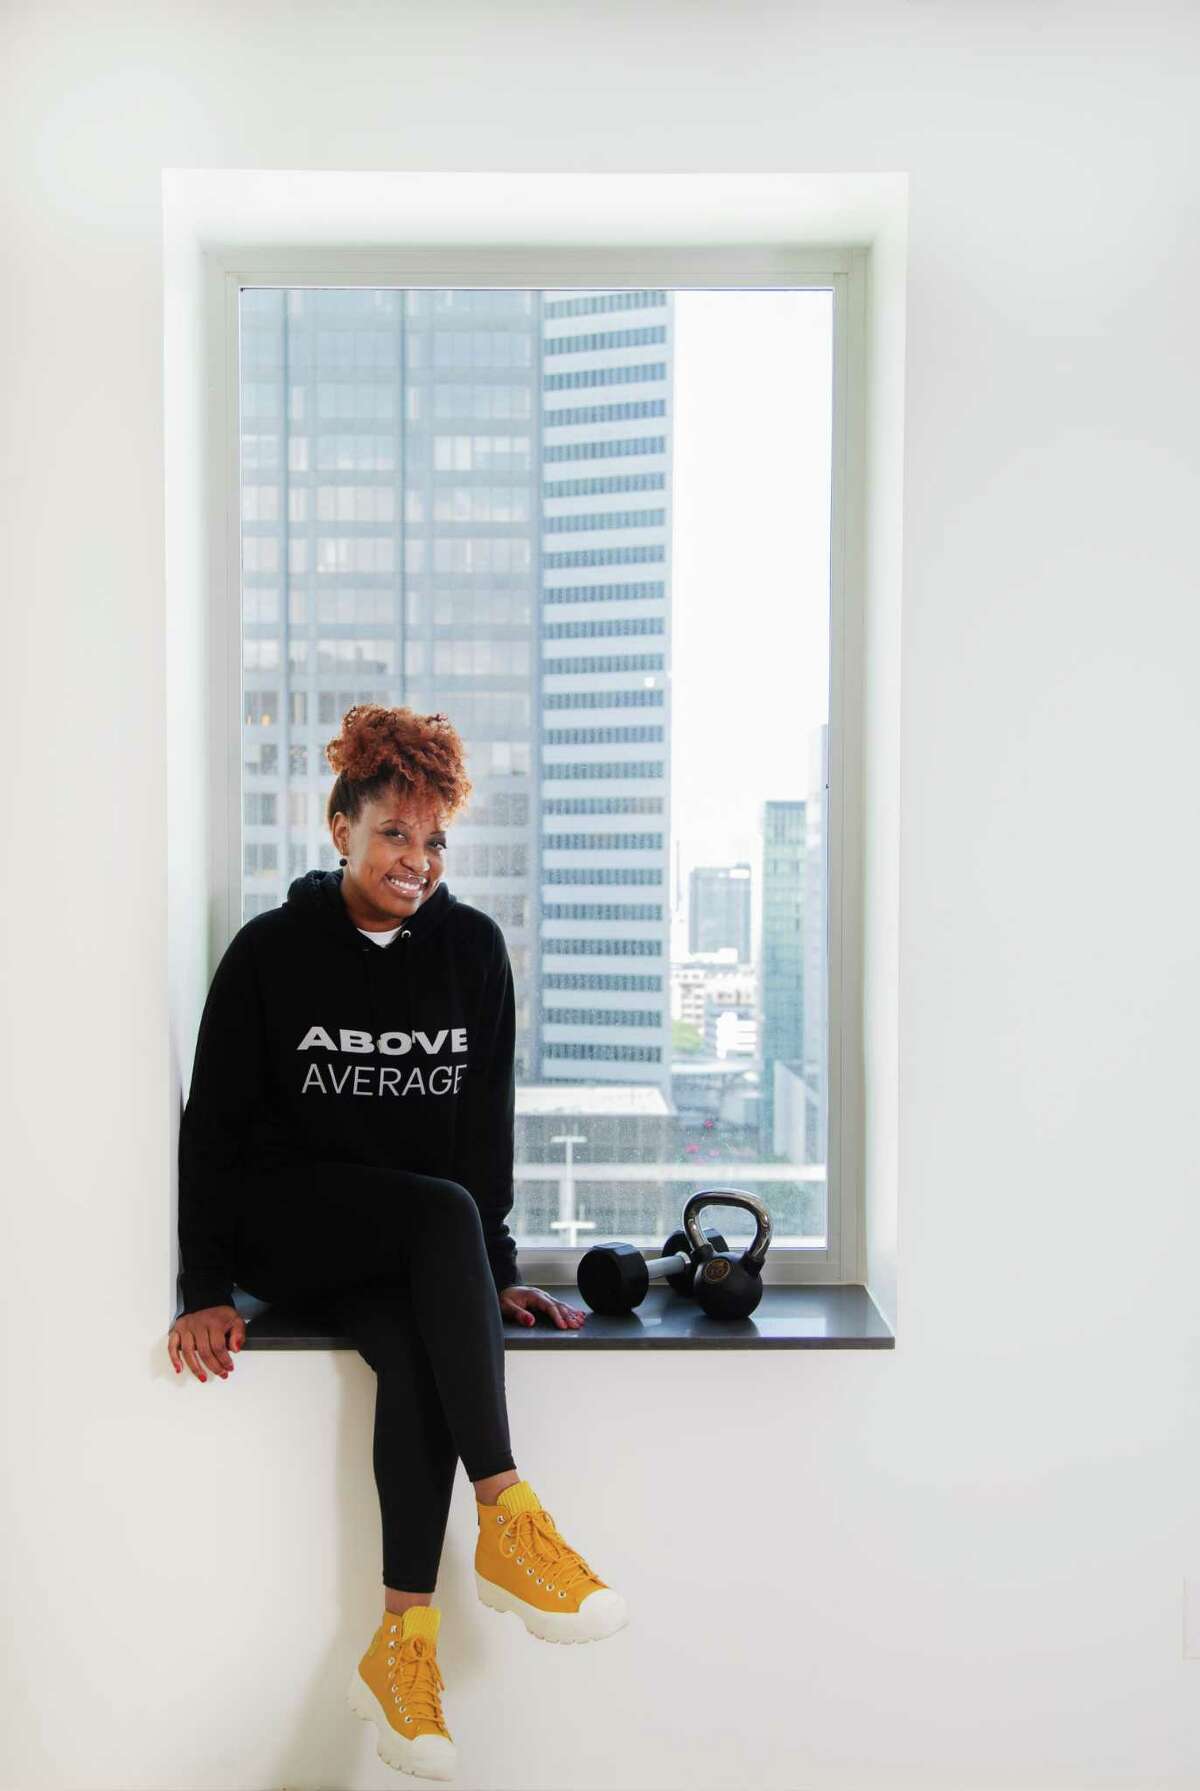 Dawn Callahan models one of the athletic sportswear hoodies she created with the message “Above Average,” Monday, May 10, 2021, in Houston. Callahan created the clothing during the pandemic as her side project.